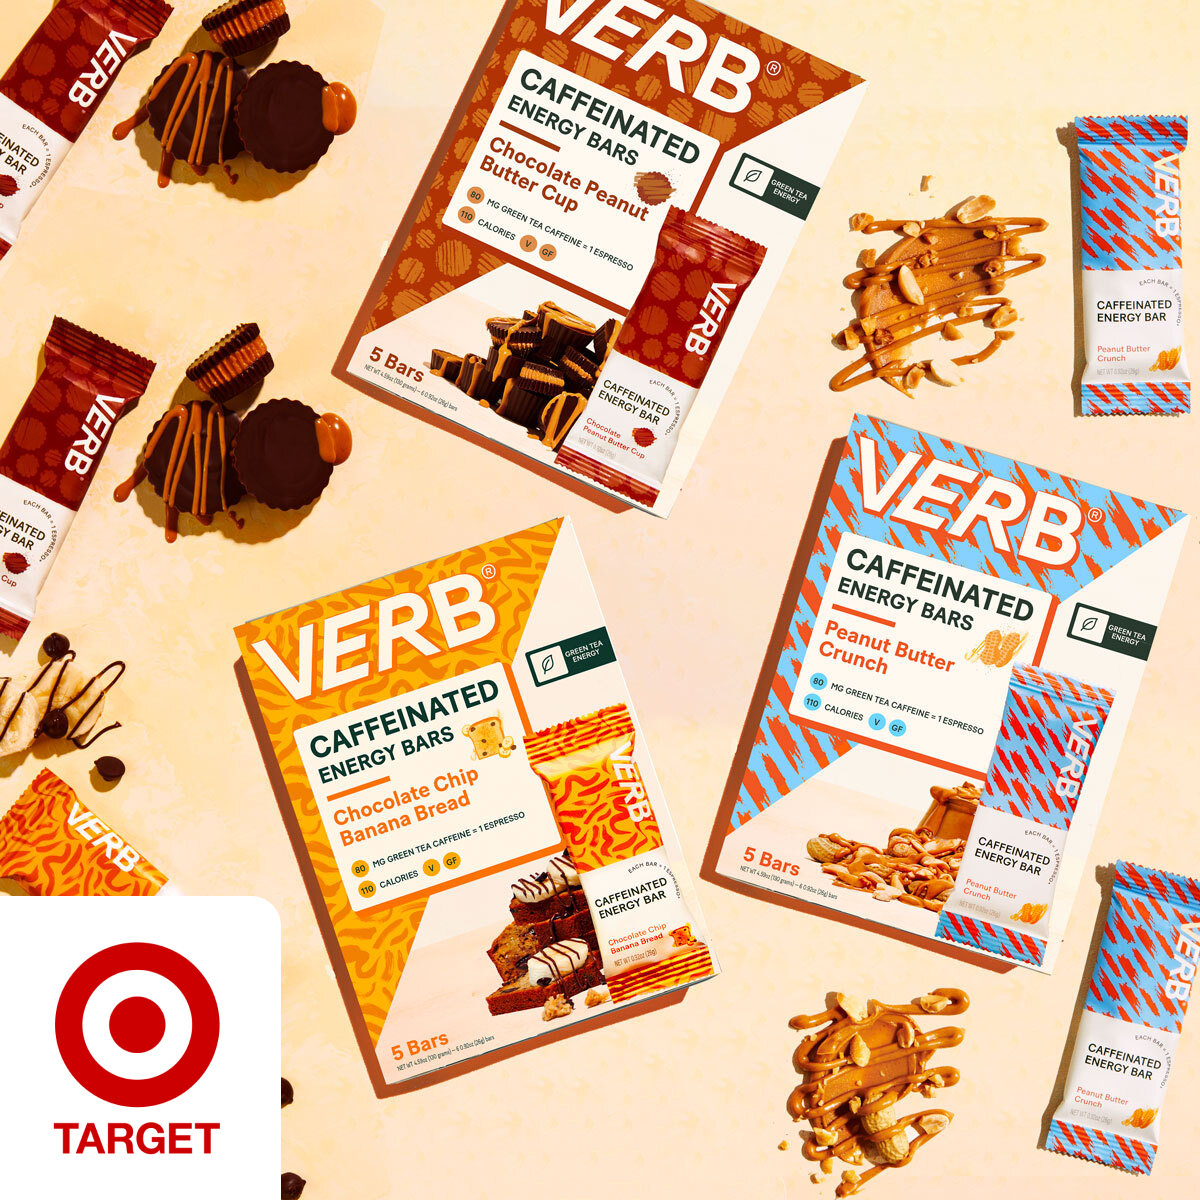 Free Box of Verb Caffeinated Energy Bars at Target